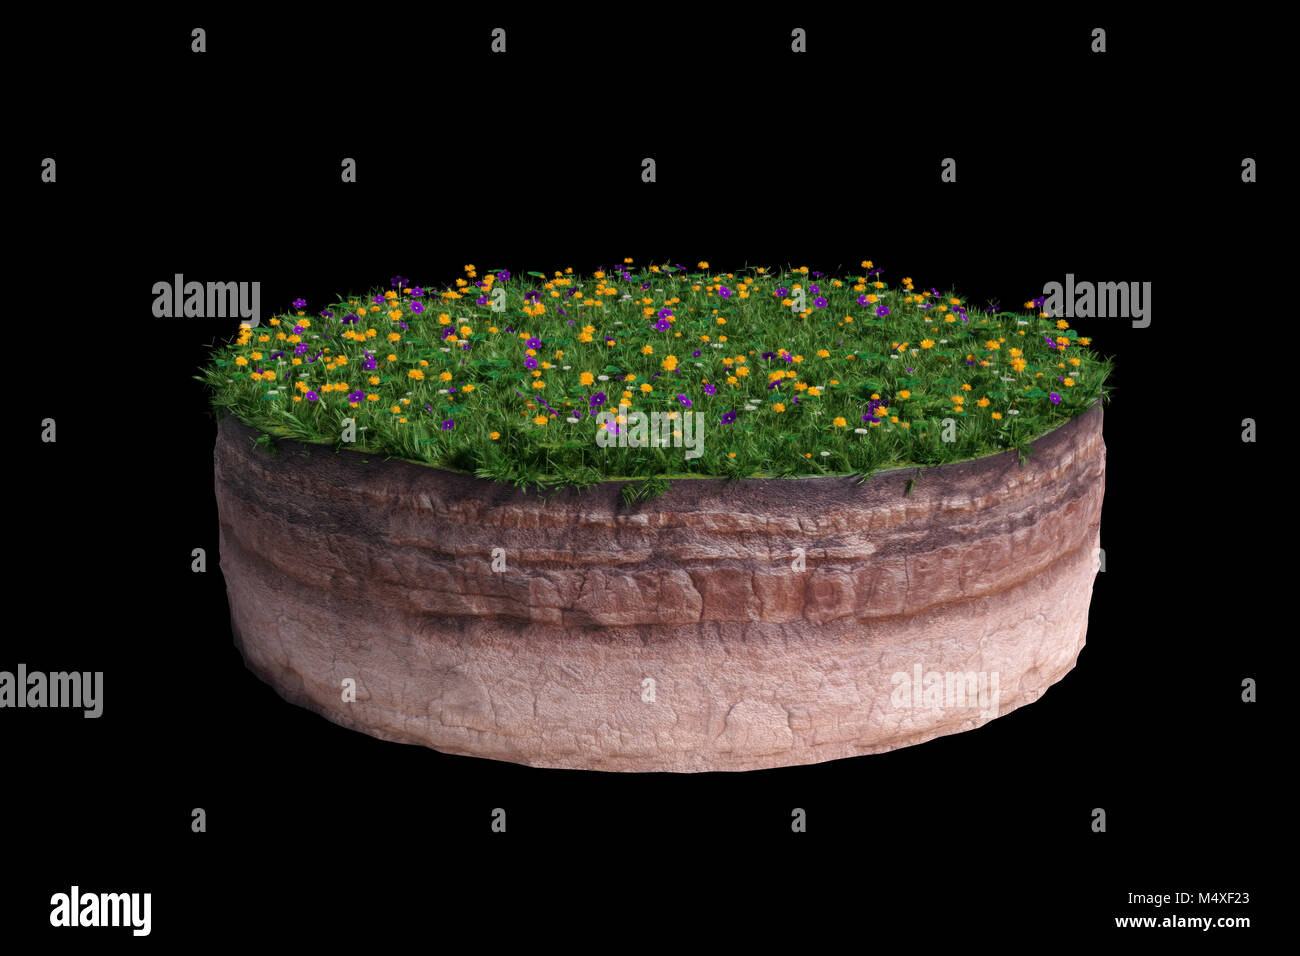 model of a cross section of ground with grass and flowers on the surface (3d illustration, isolated on black background) Stock Photo